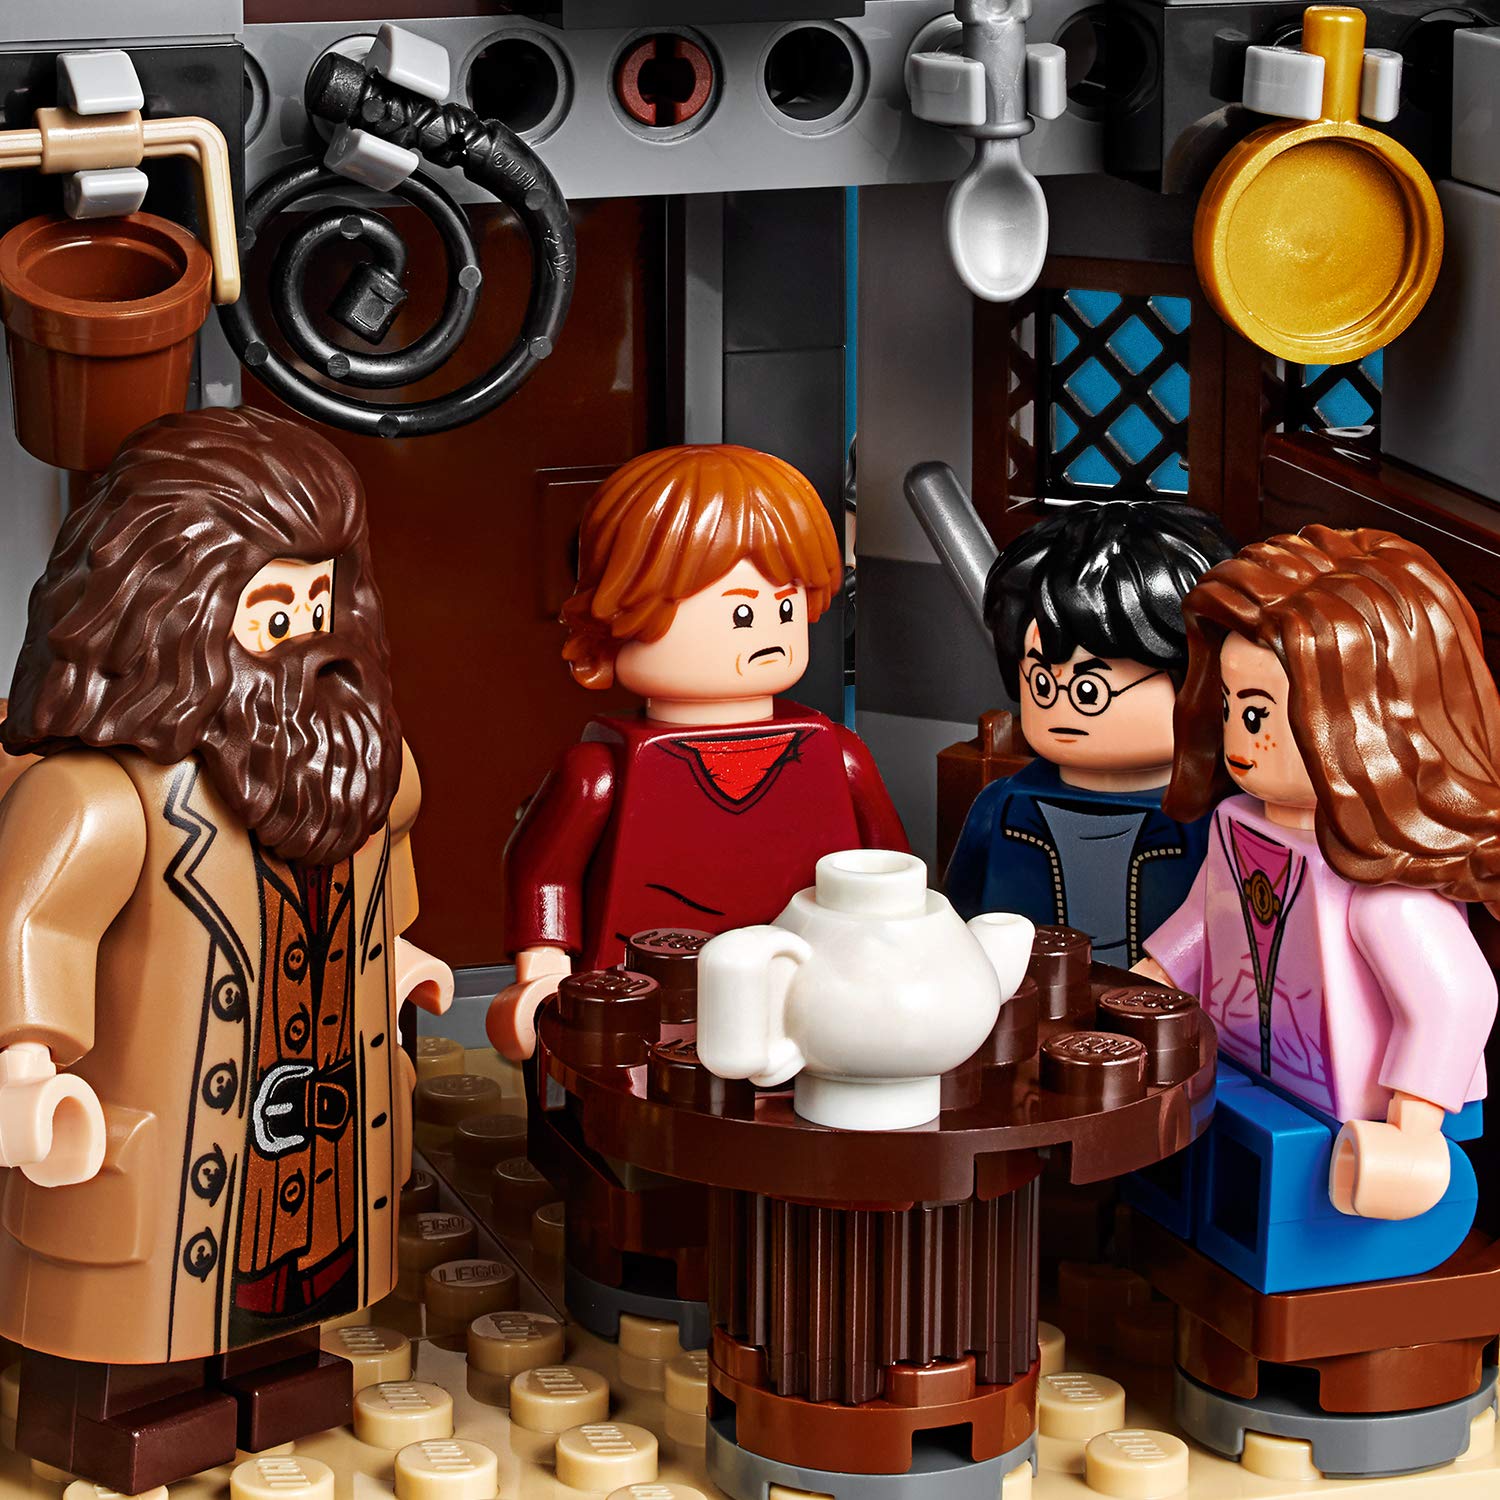 Lego Harry Potter Wallpapers High Quality | Download Free